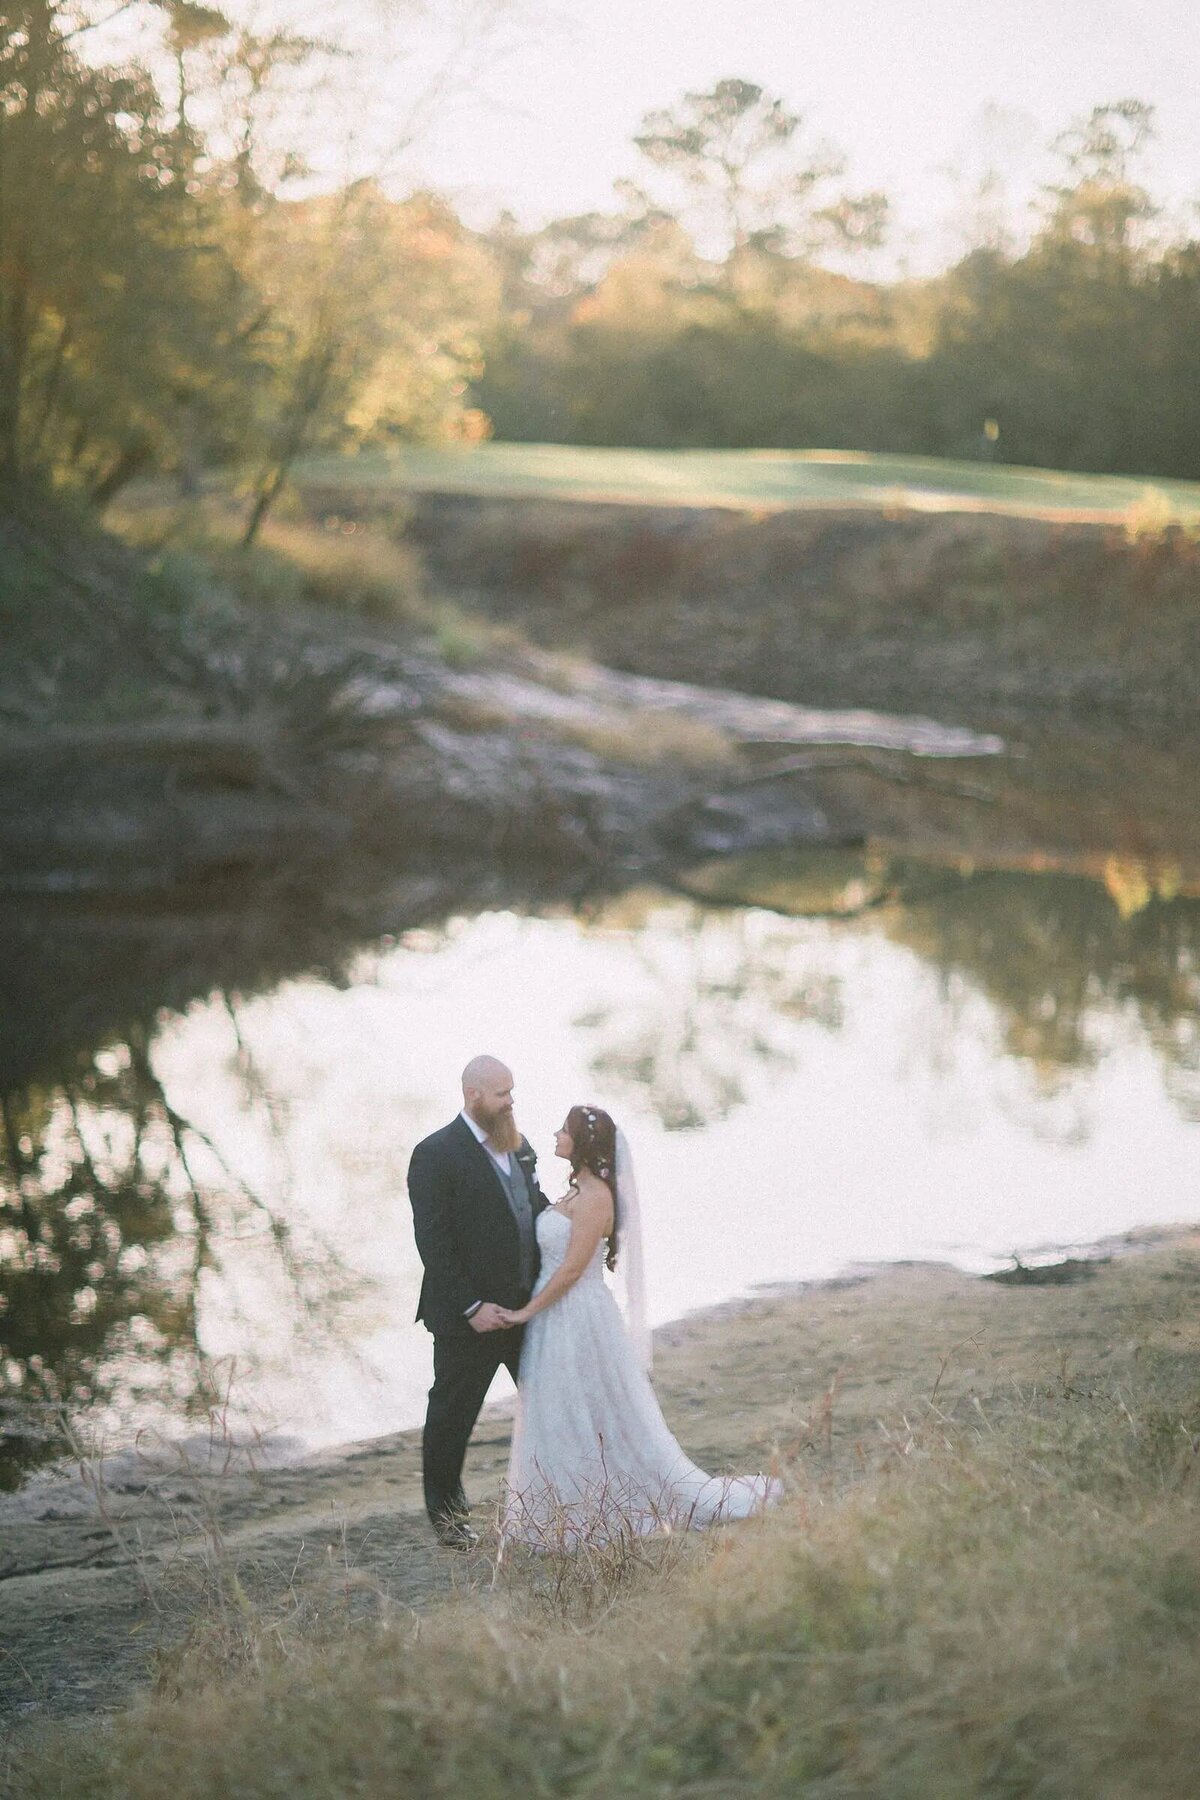 A bride and groom stand by a serene river, enveloped in a soft haze, with a picturesque landscape in the background.